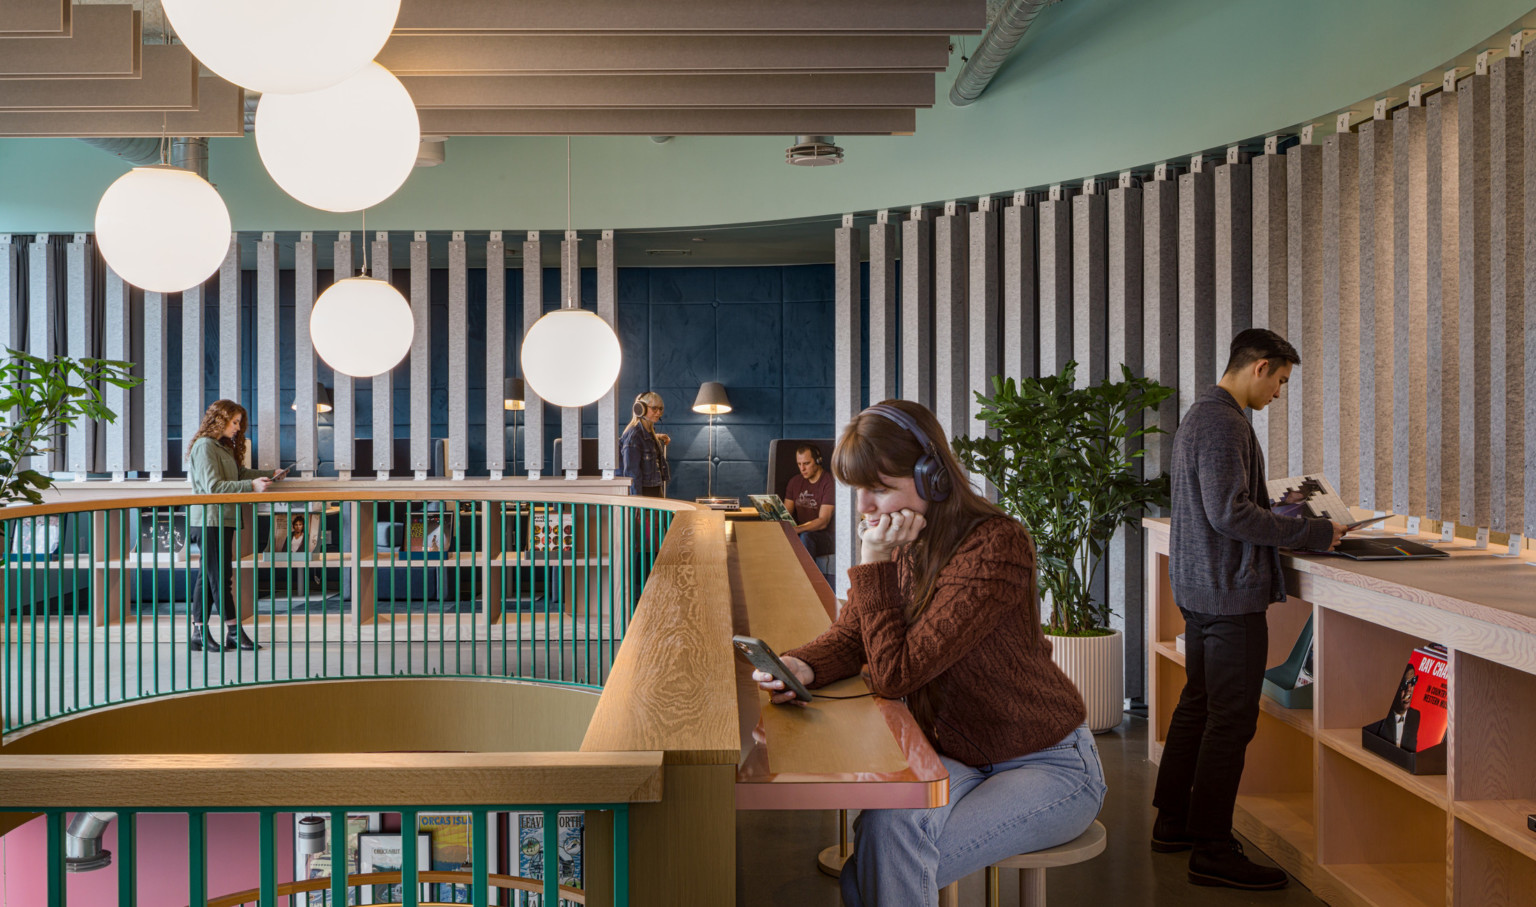 a woman on her phone with headphones sits at a radial wooden counter overlooking a mezzanine finished in wooden slats